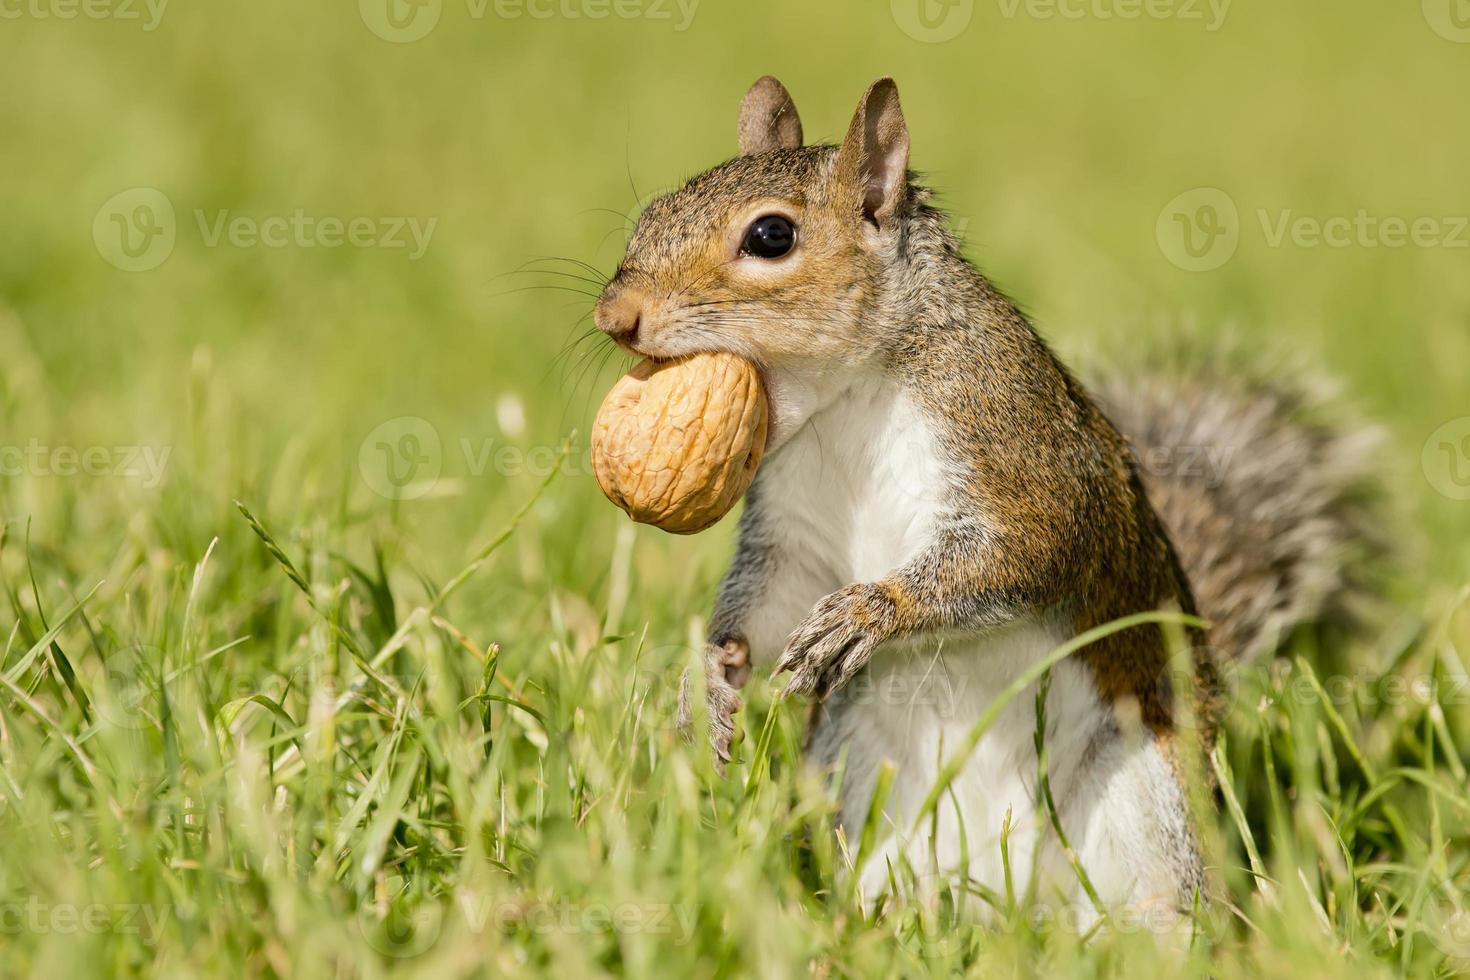 A grey squirrel looking at you while holding a nut photo